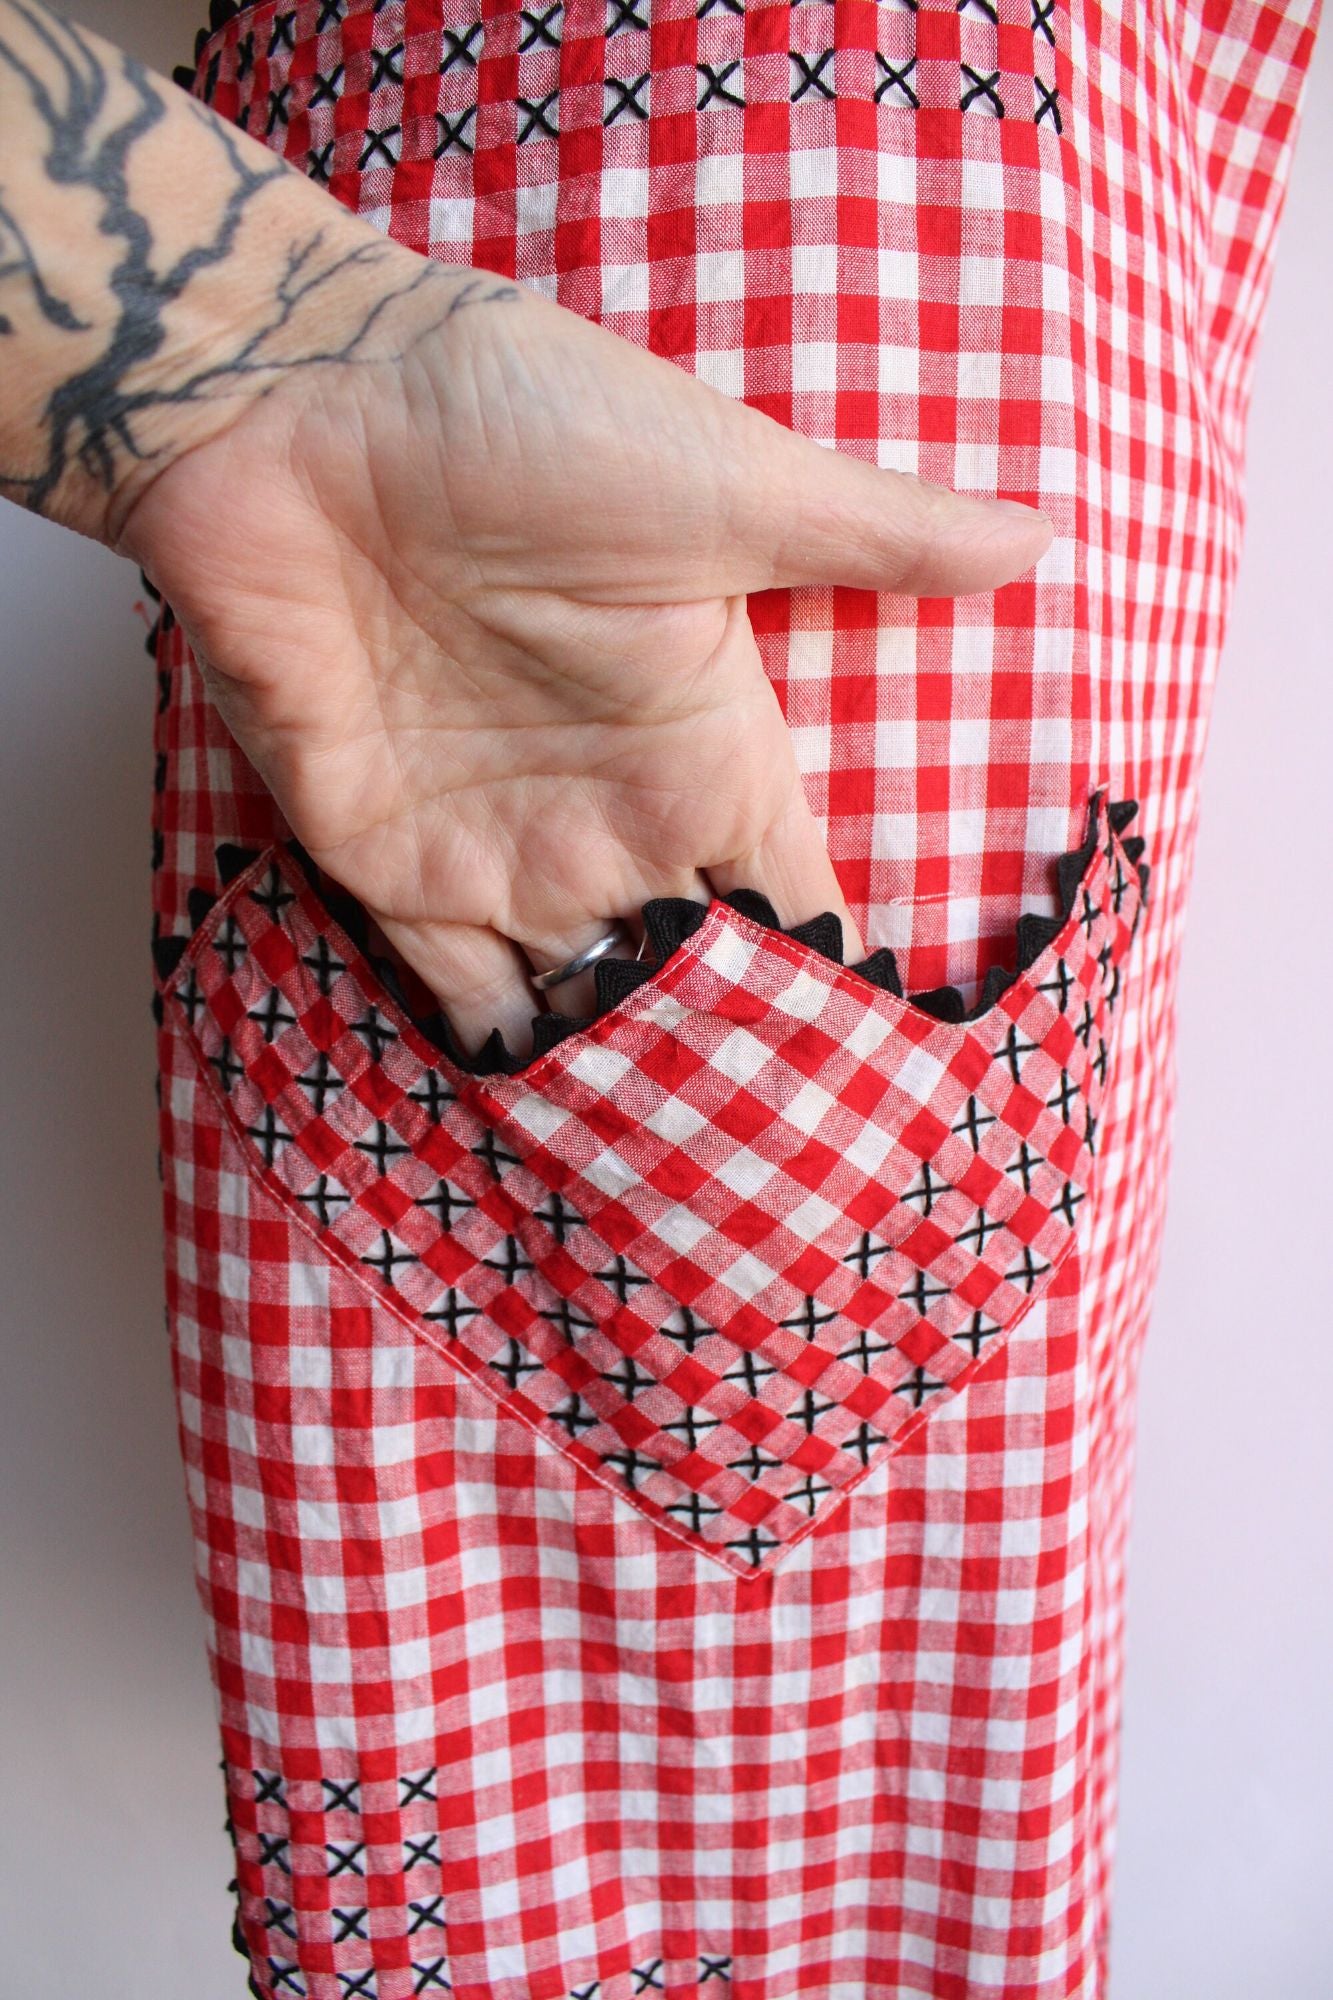 Vintage 1960s Full Red Gingham Pinafore Apron With Pocket